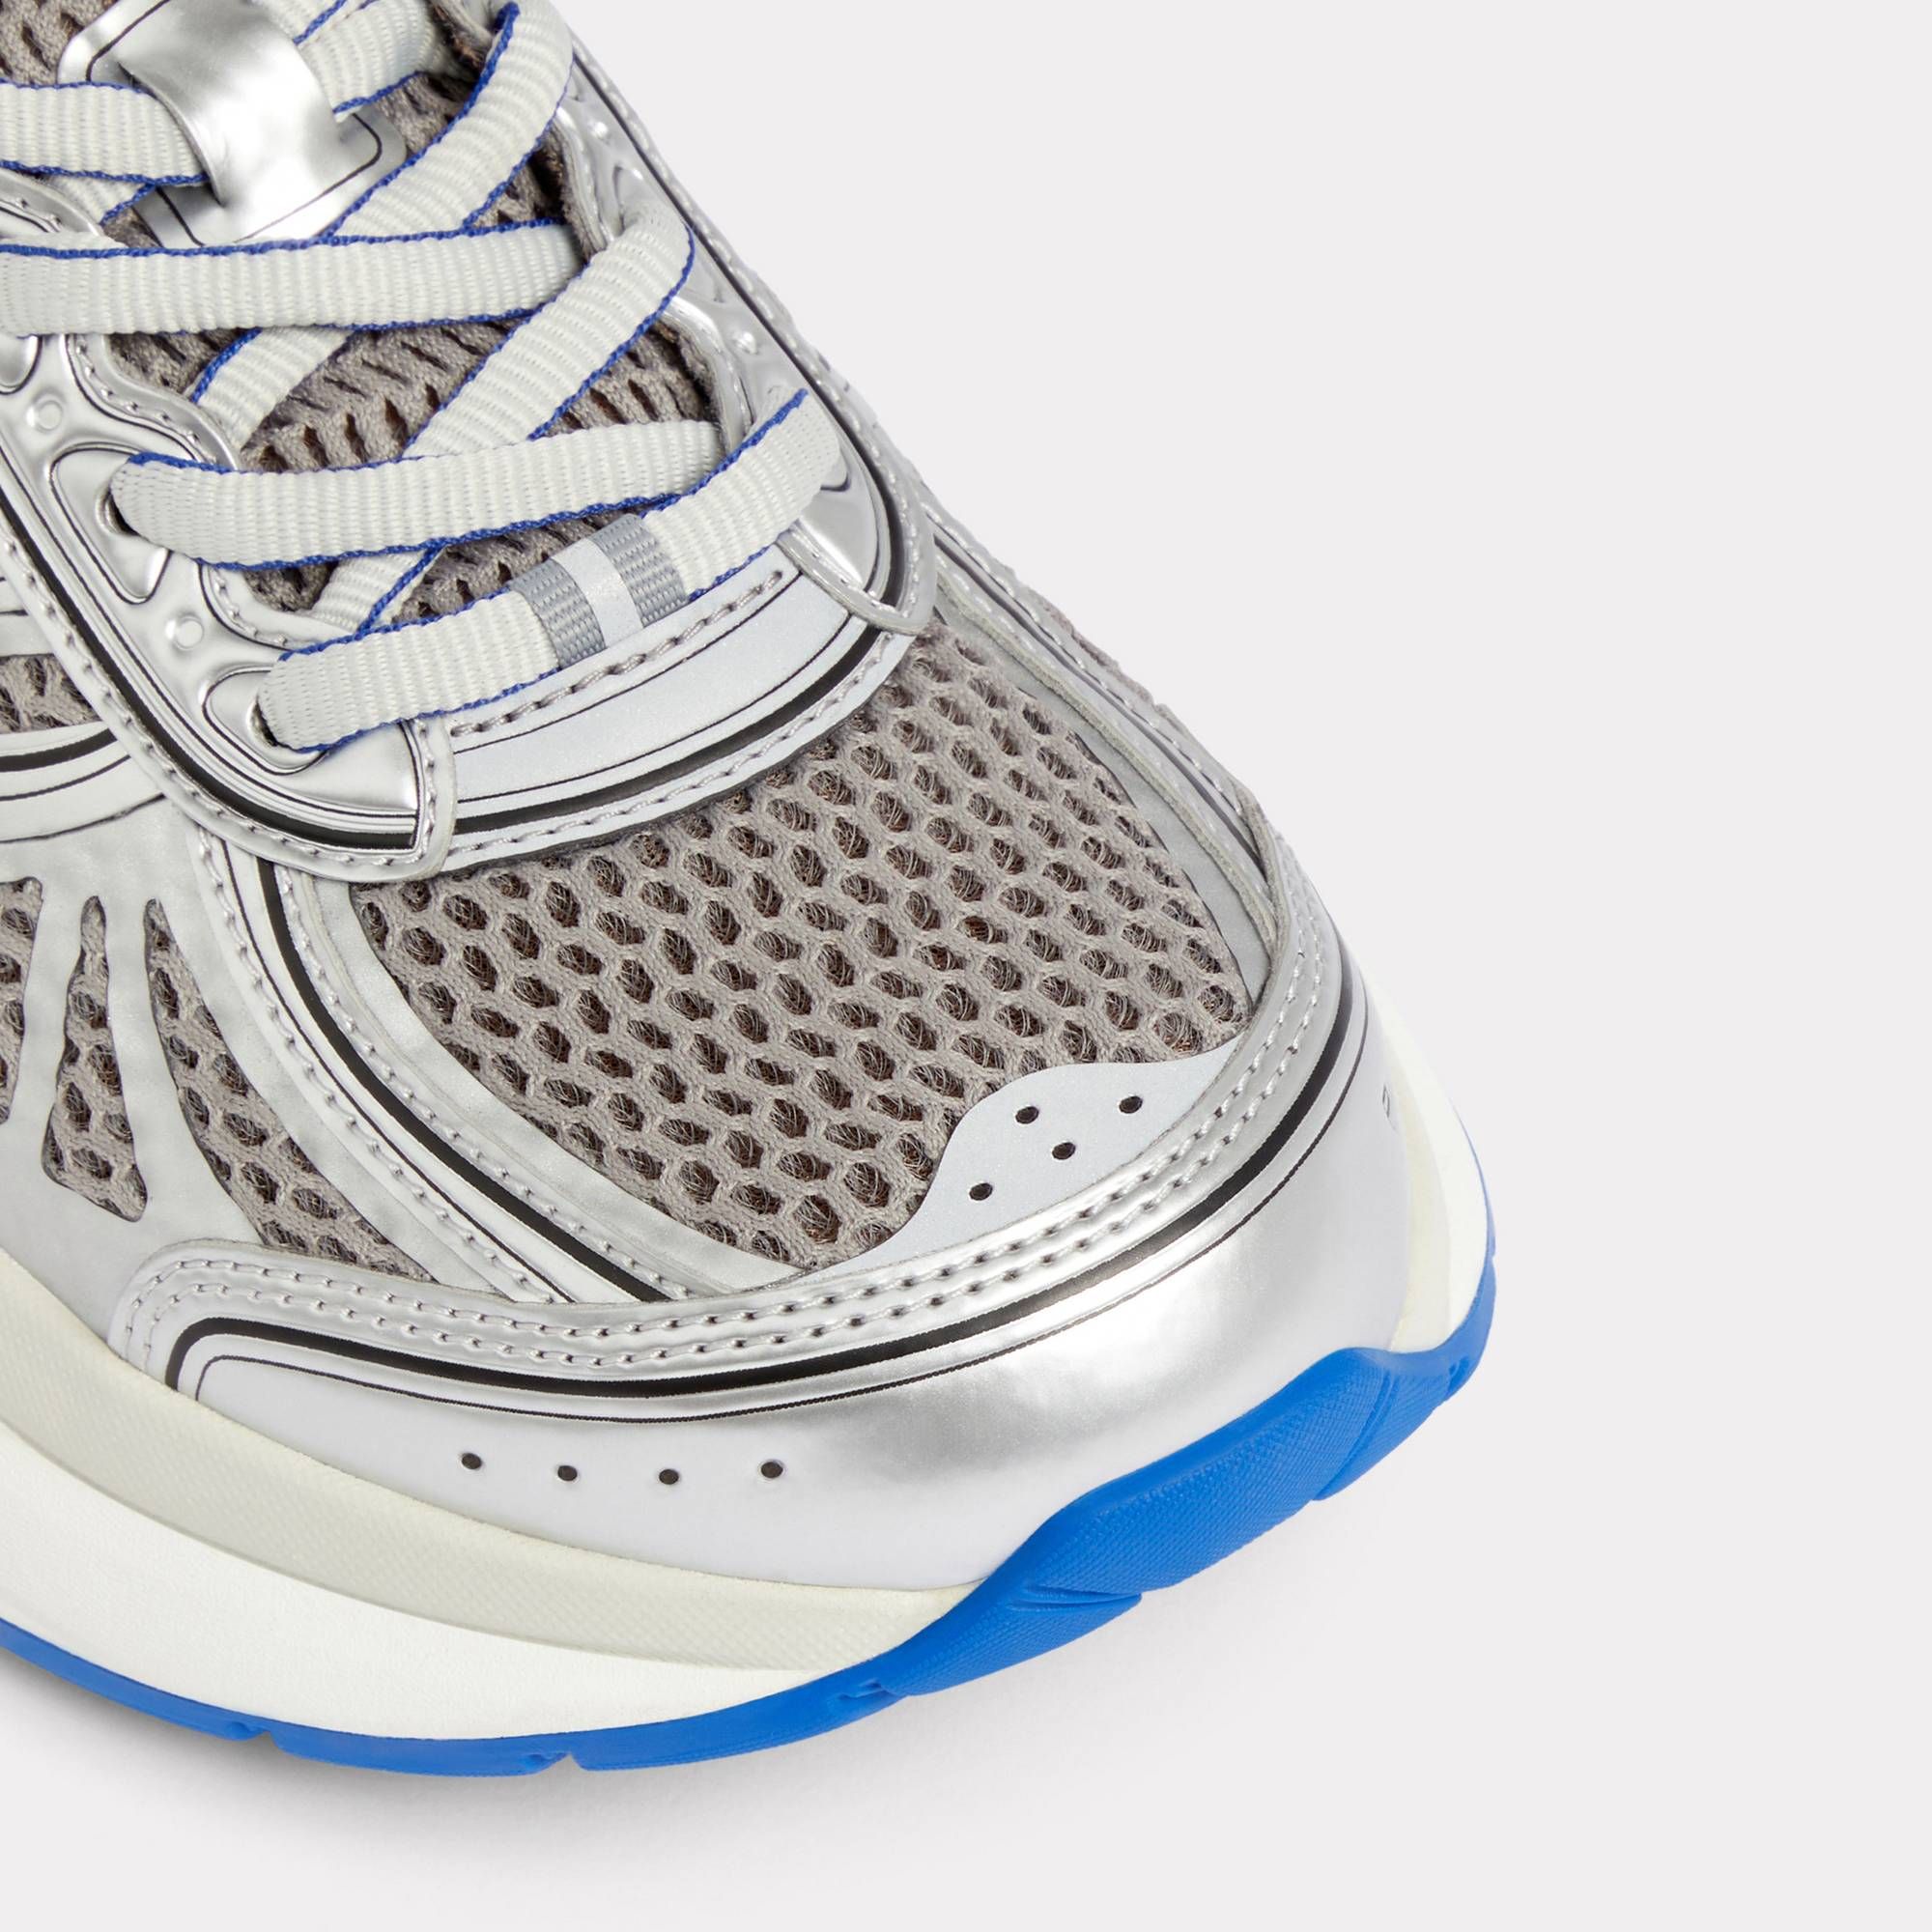  KENZO PACE Trainers - Silver 